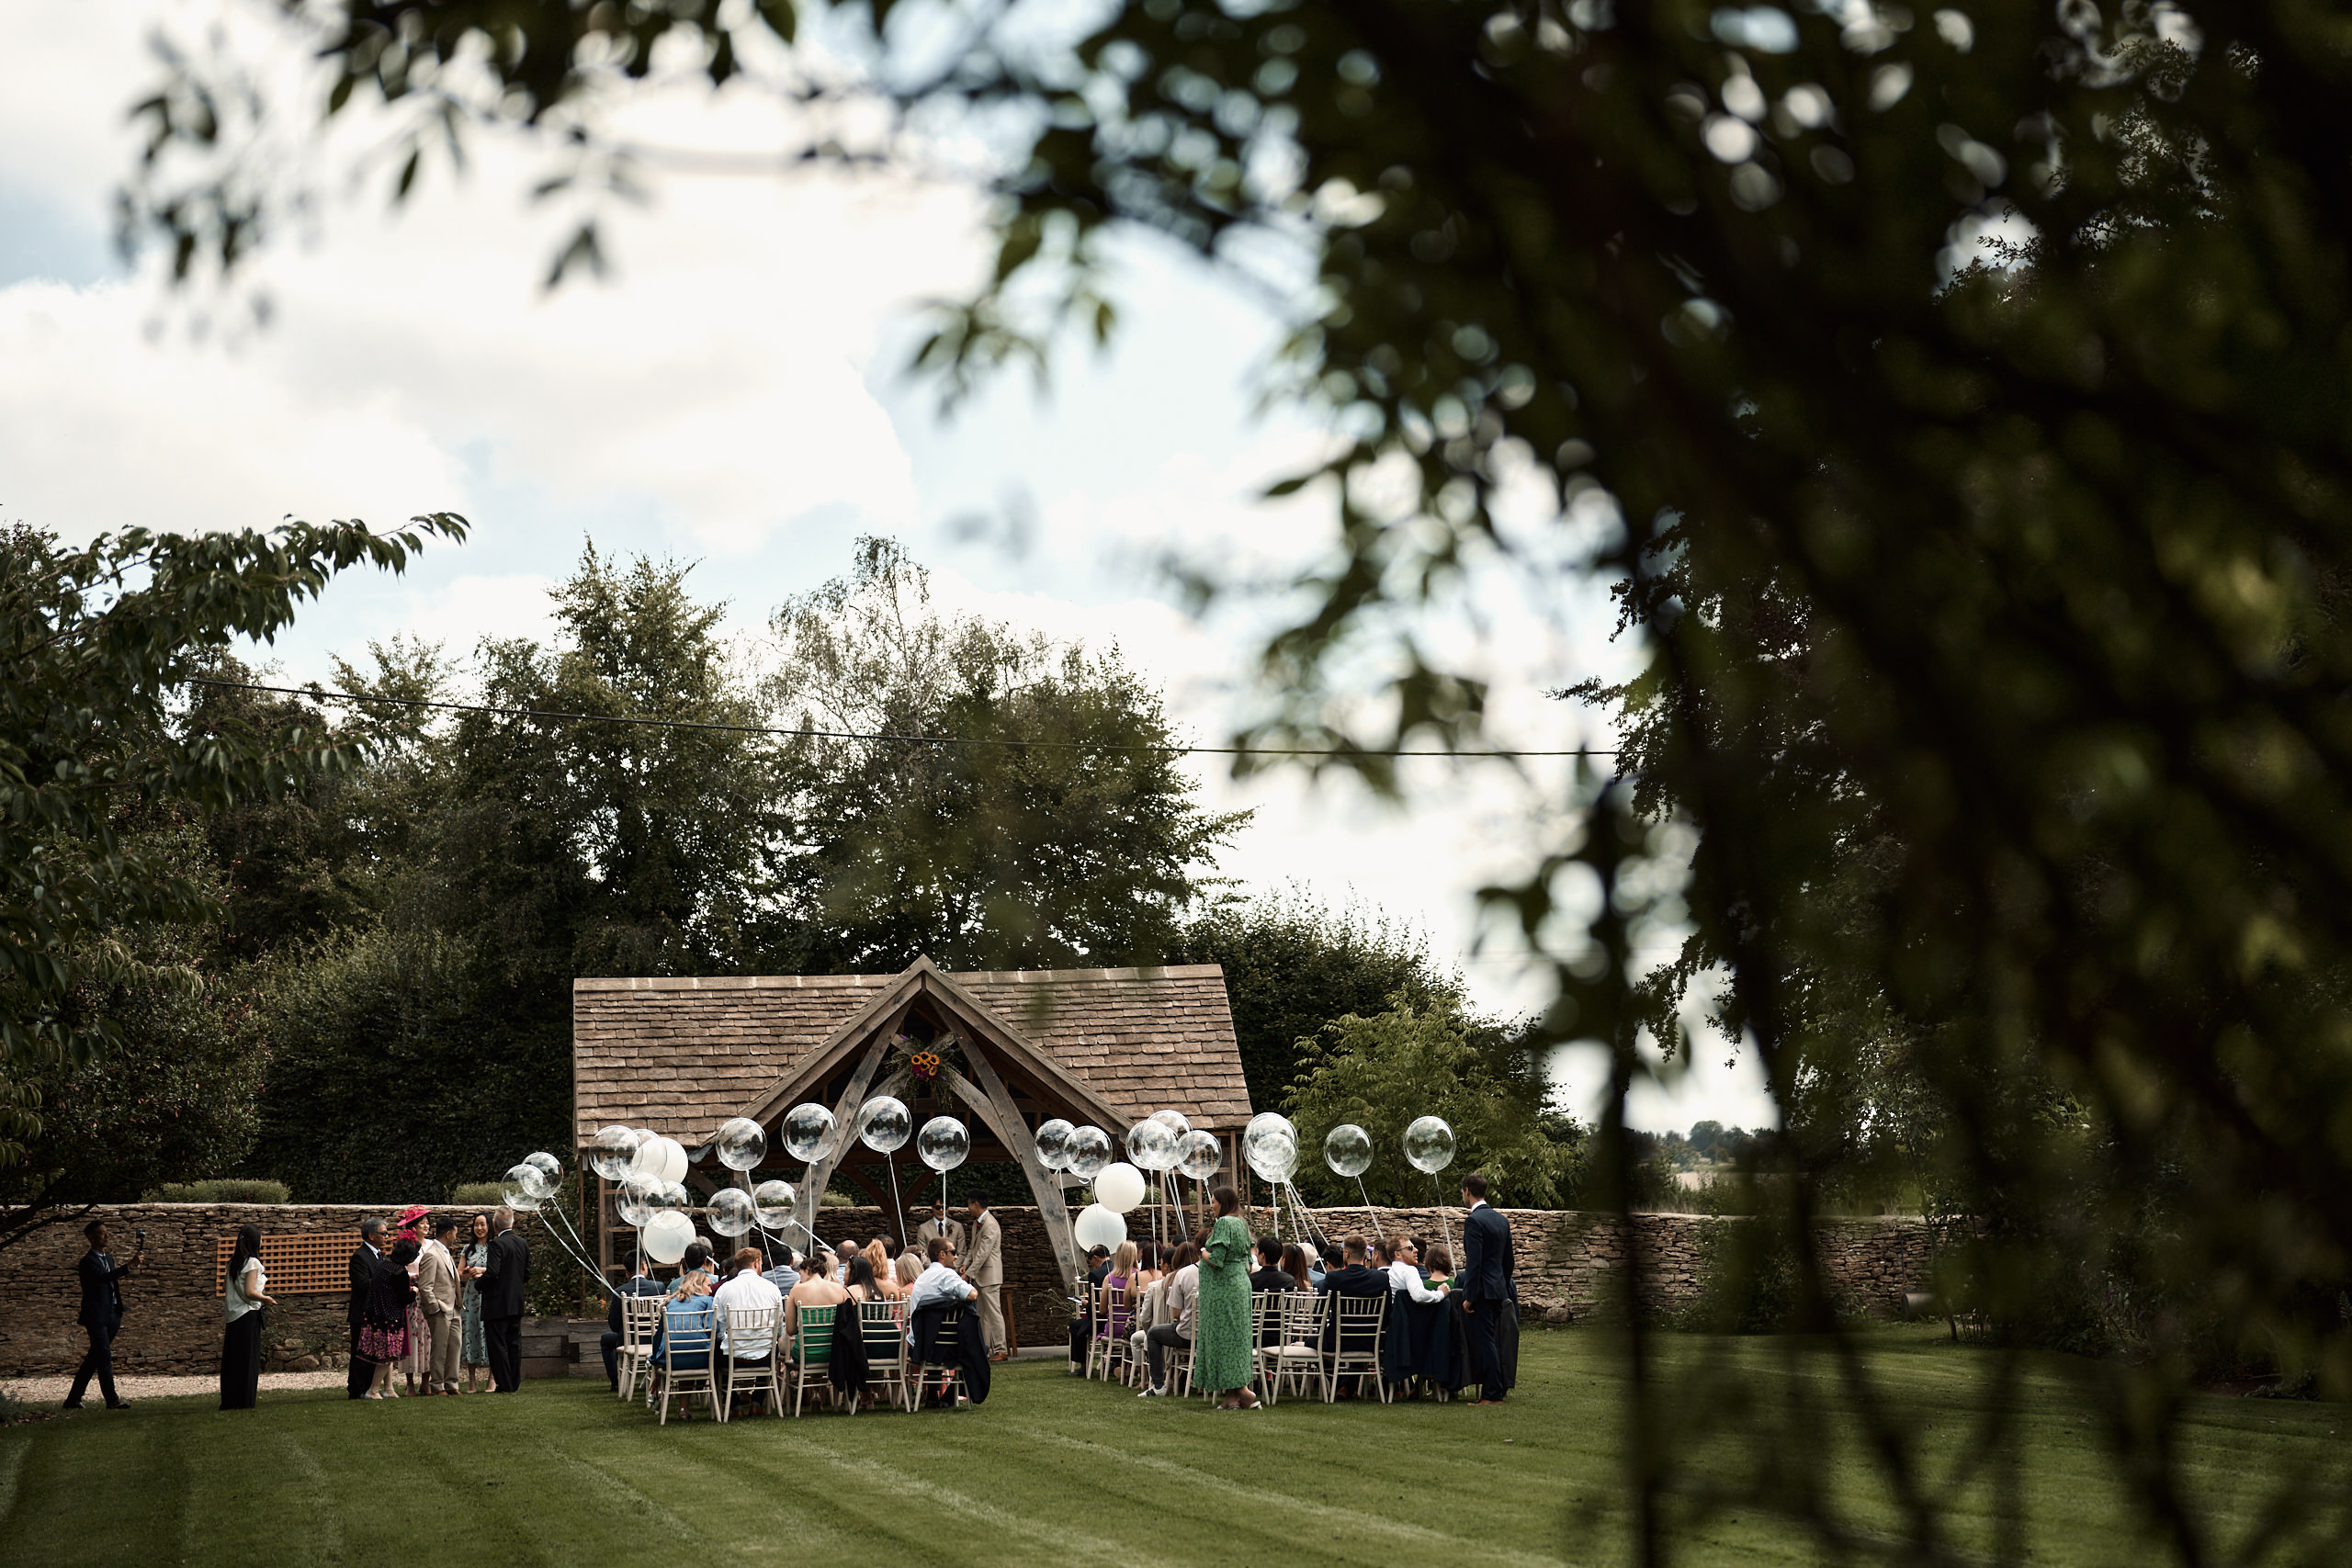 A wedding ceremony on the lawn with balloons.